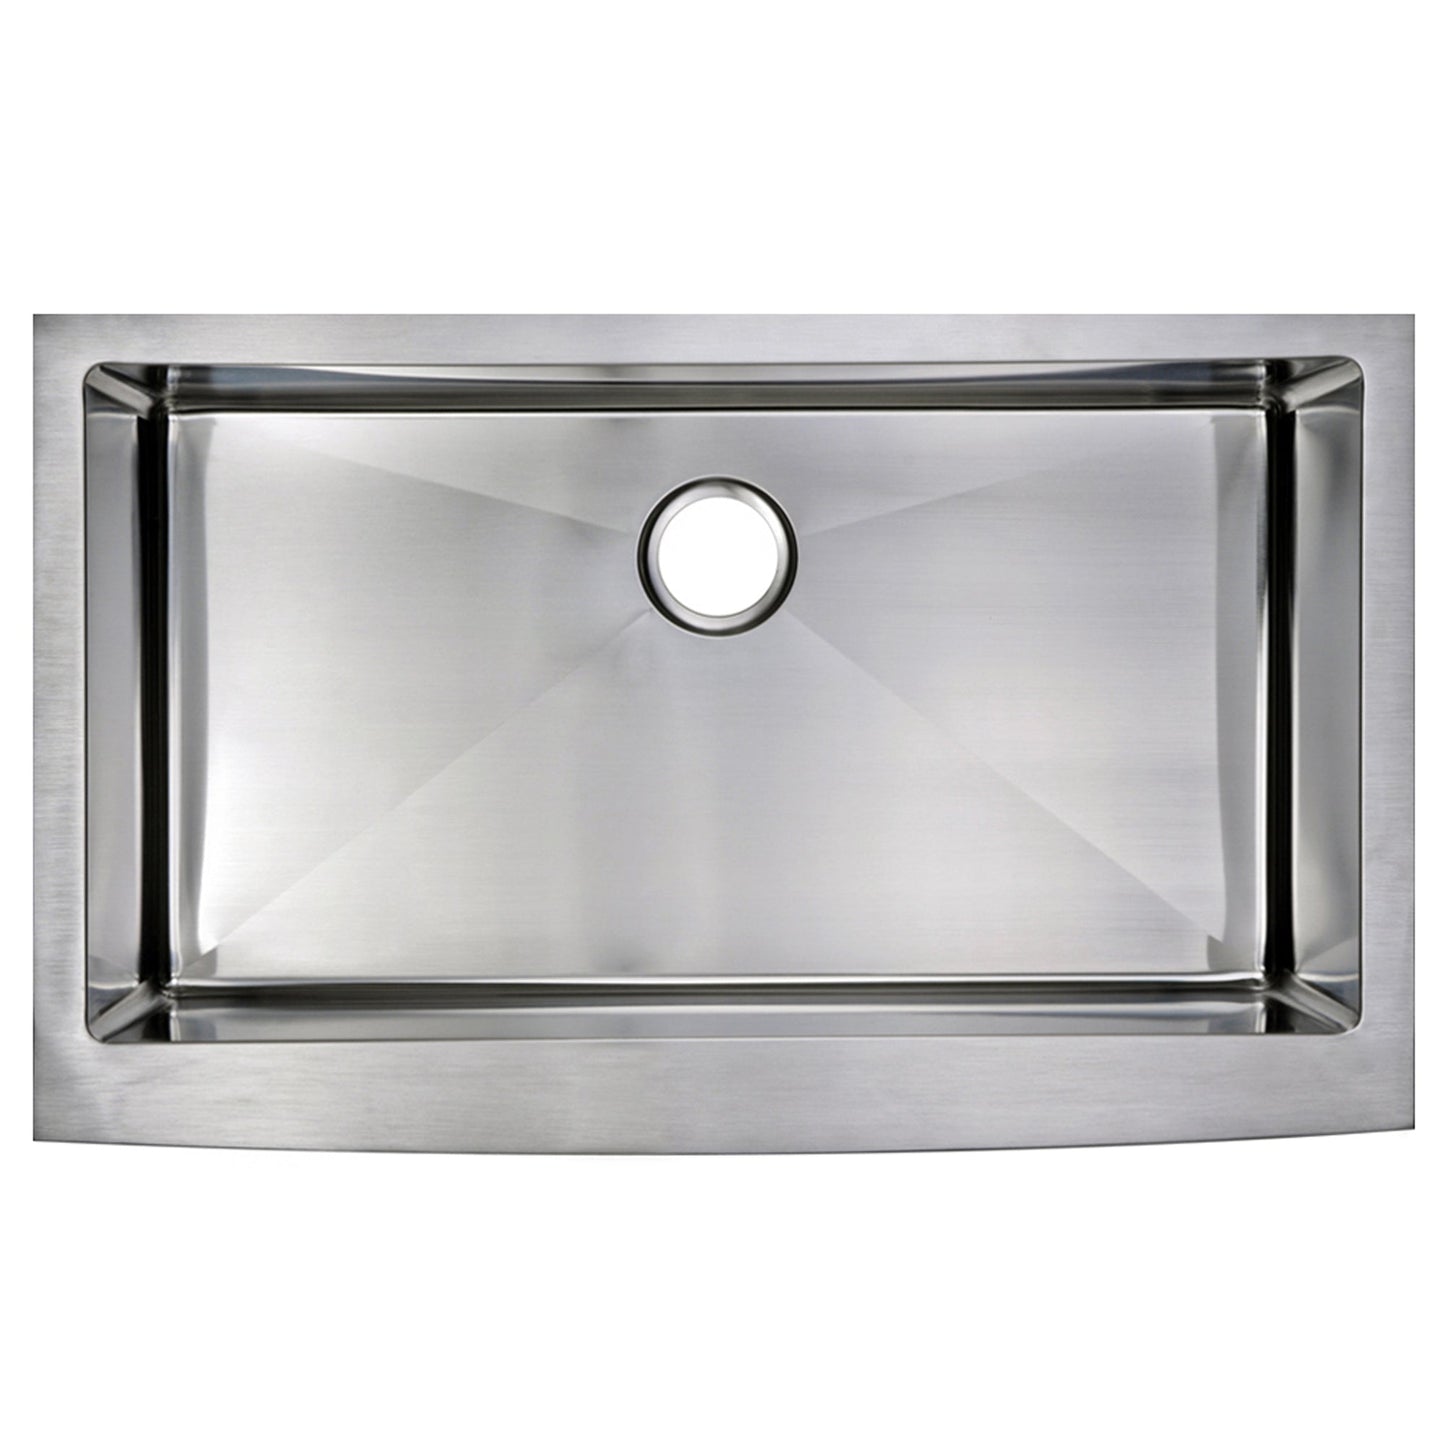 Water Creation Corner Radius Single Bowl Stainless Steel Hand Made Apron Front 36 Inch X 22 Inch Sink